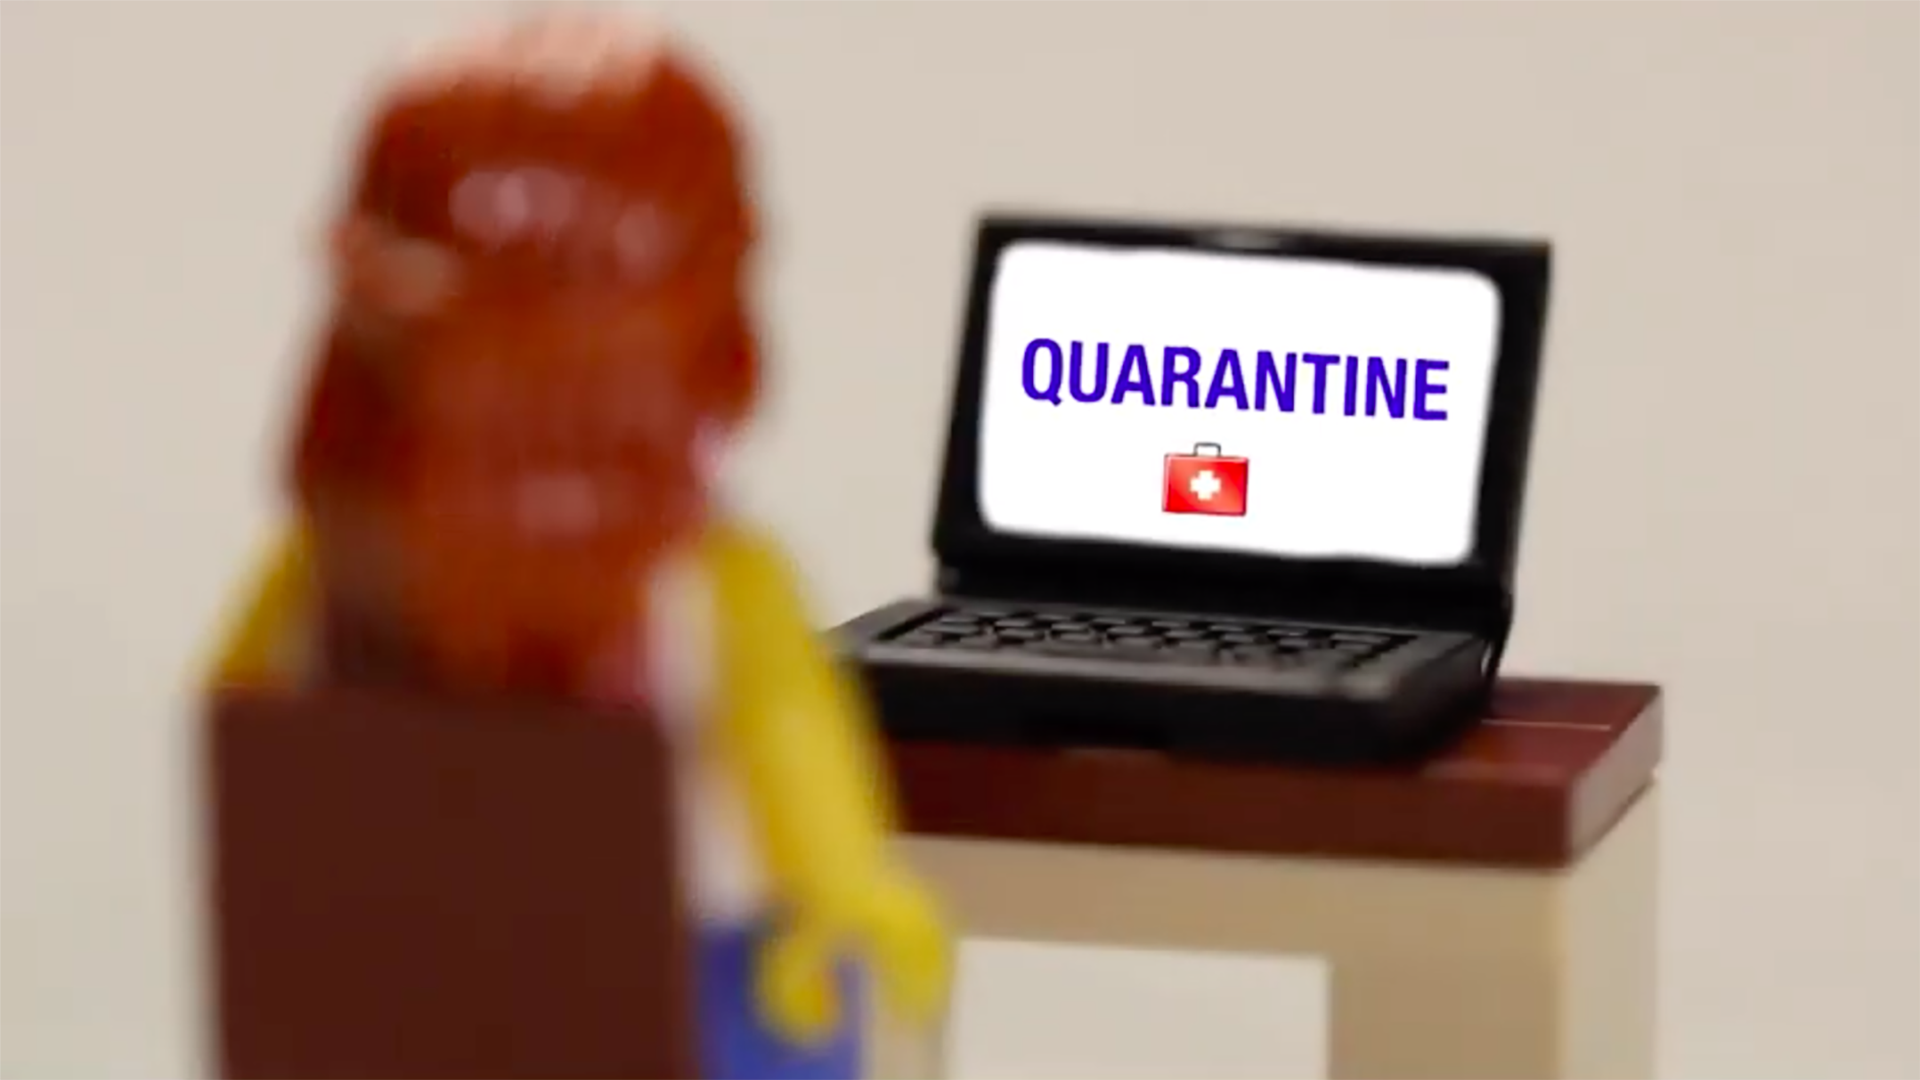 Lego person watching TV during the COVID-19 quarantine